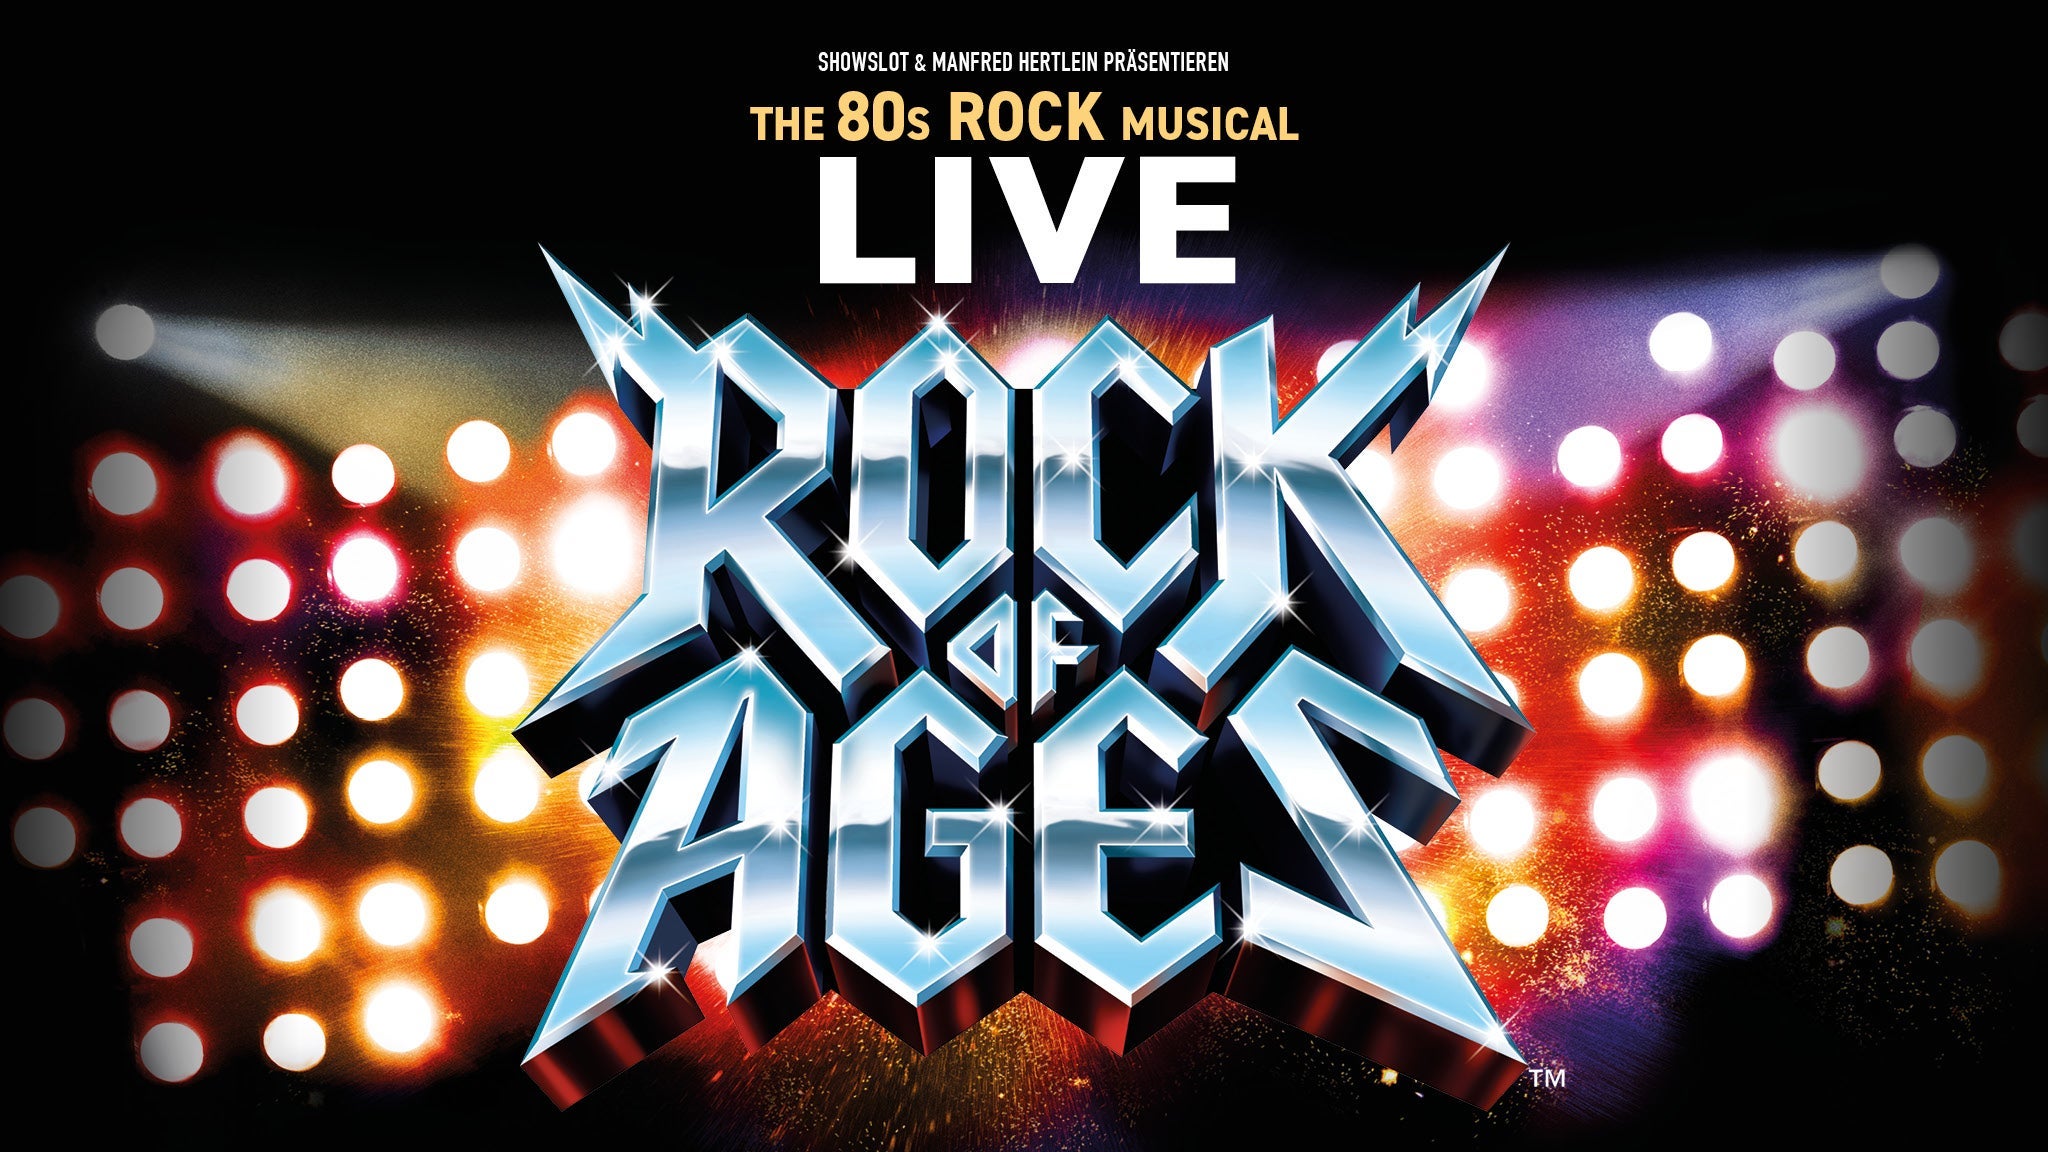 Ticket Reselling Rock Of Ages: The 80s Rock Musical